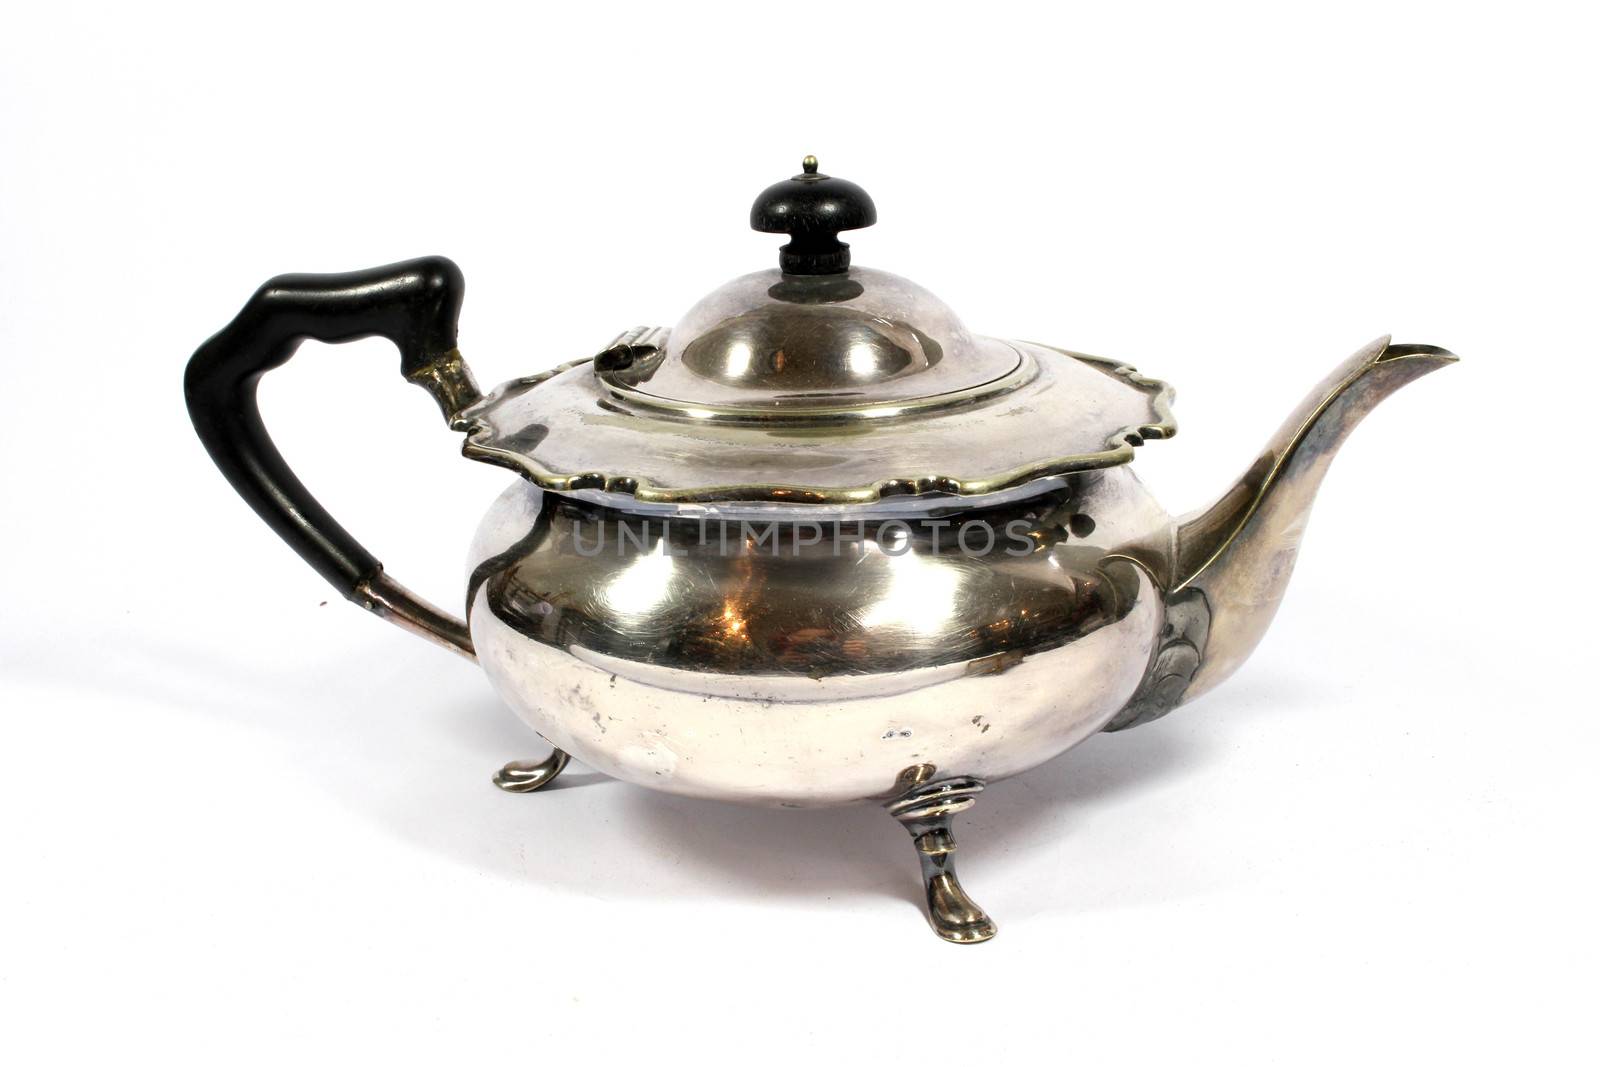 A Vintage Antique Kettle or Tea Pot In Metal on White Background